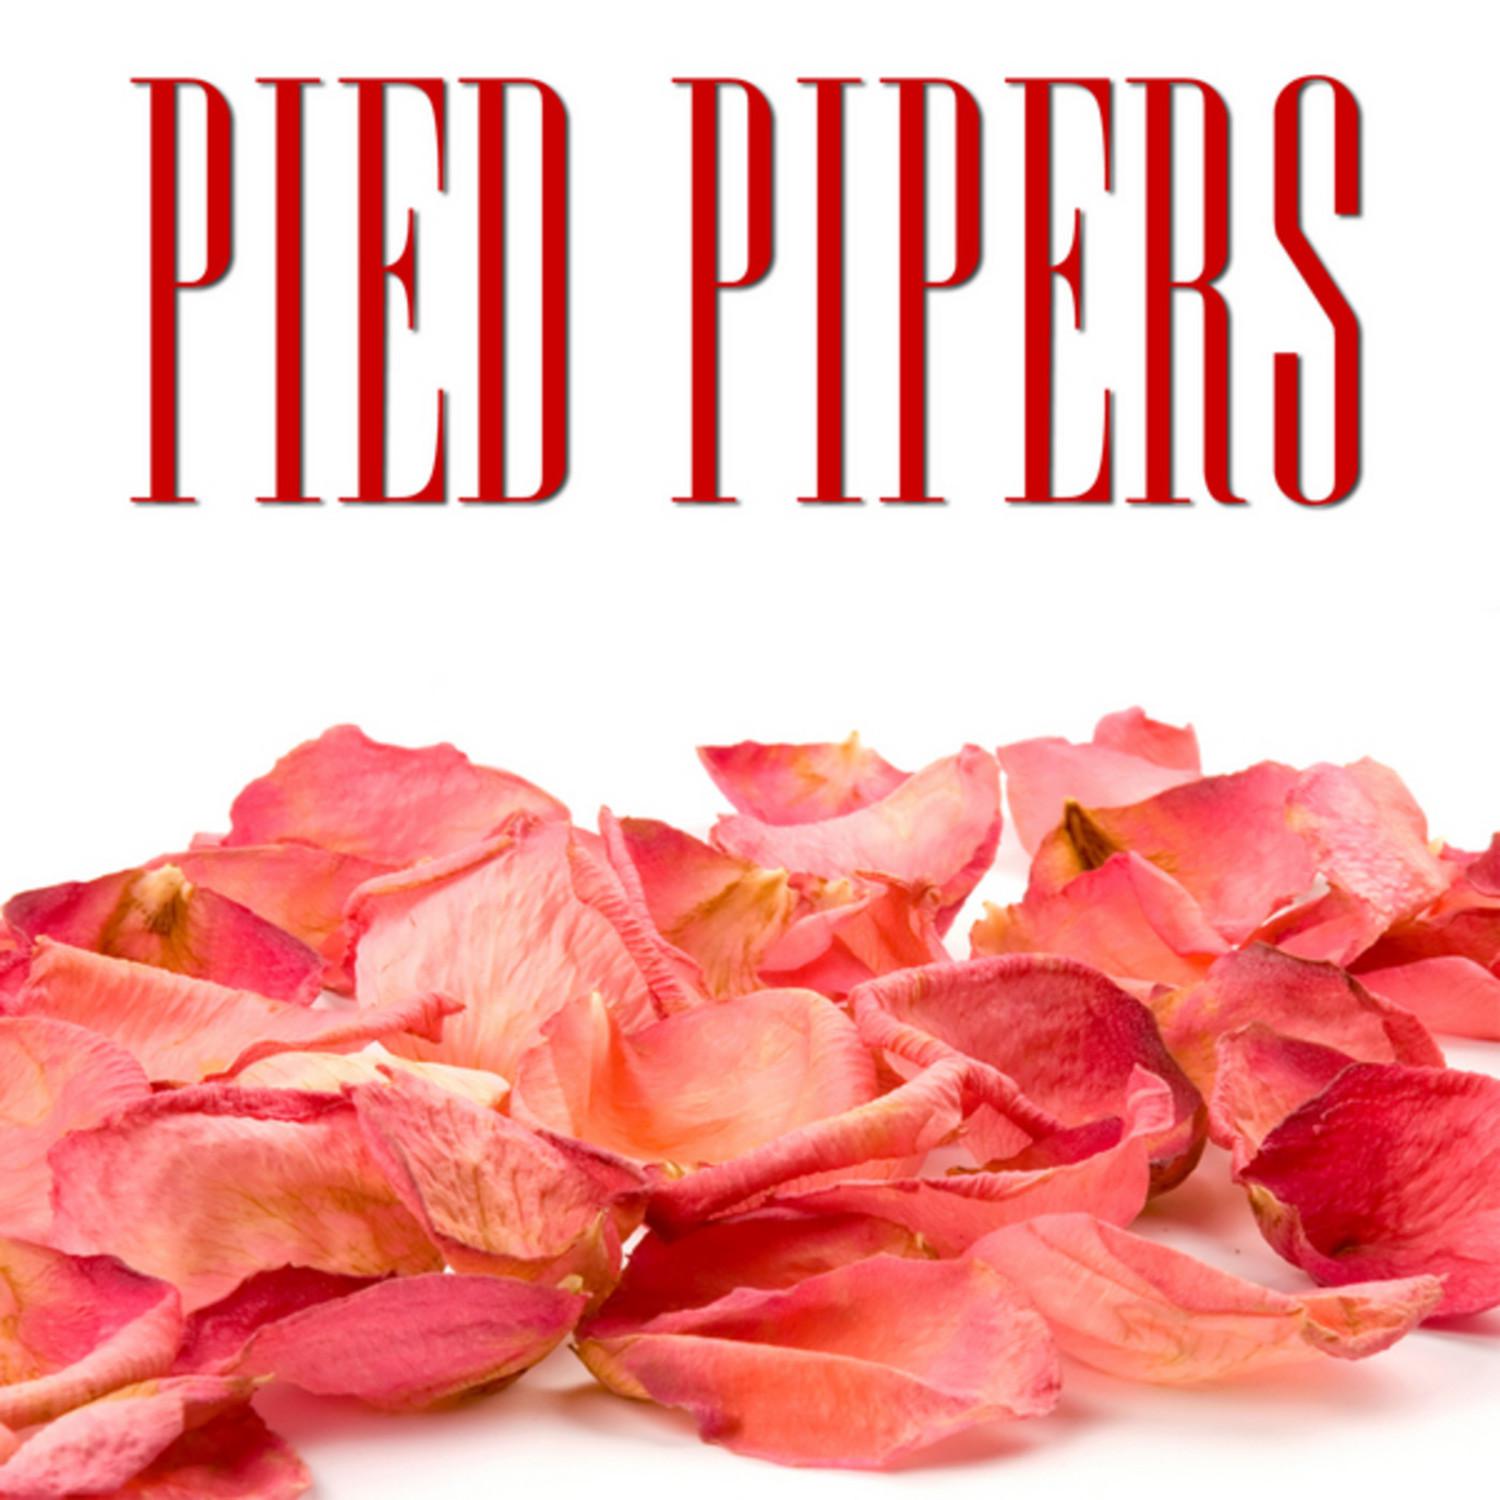 Classic Years of Pied Pipers